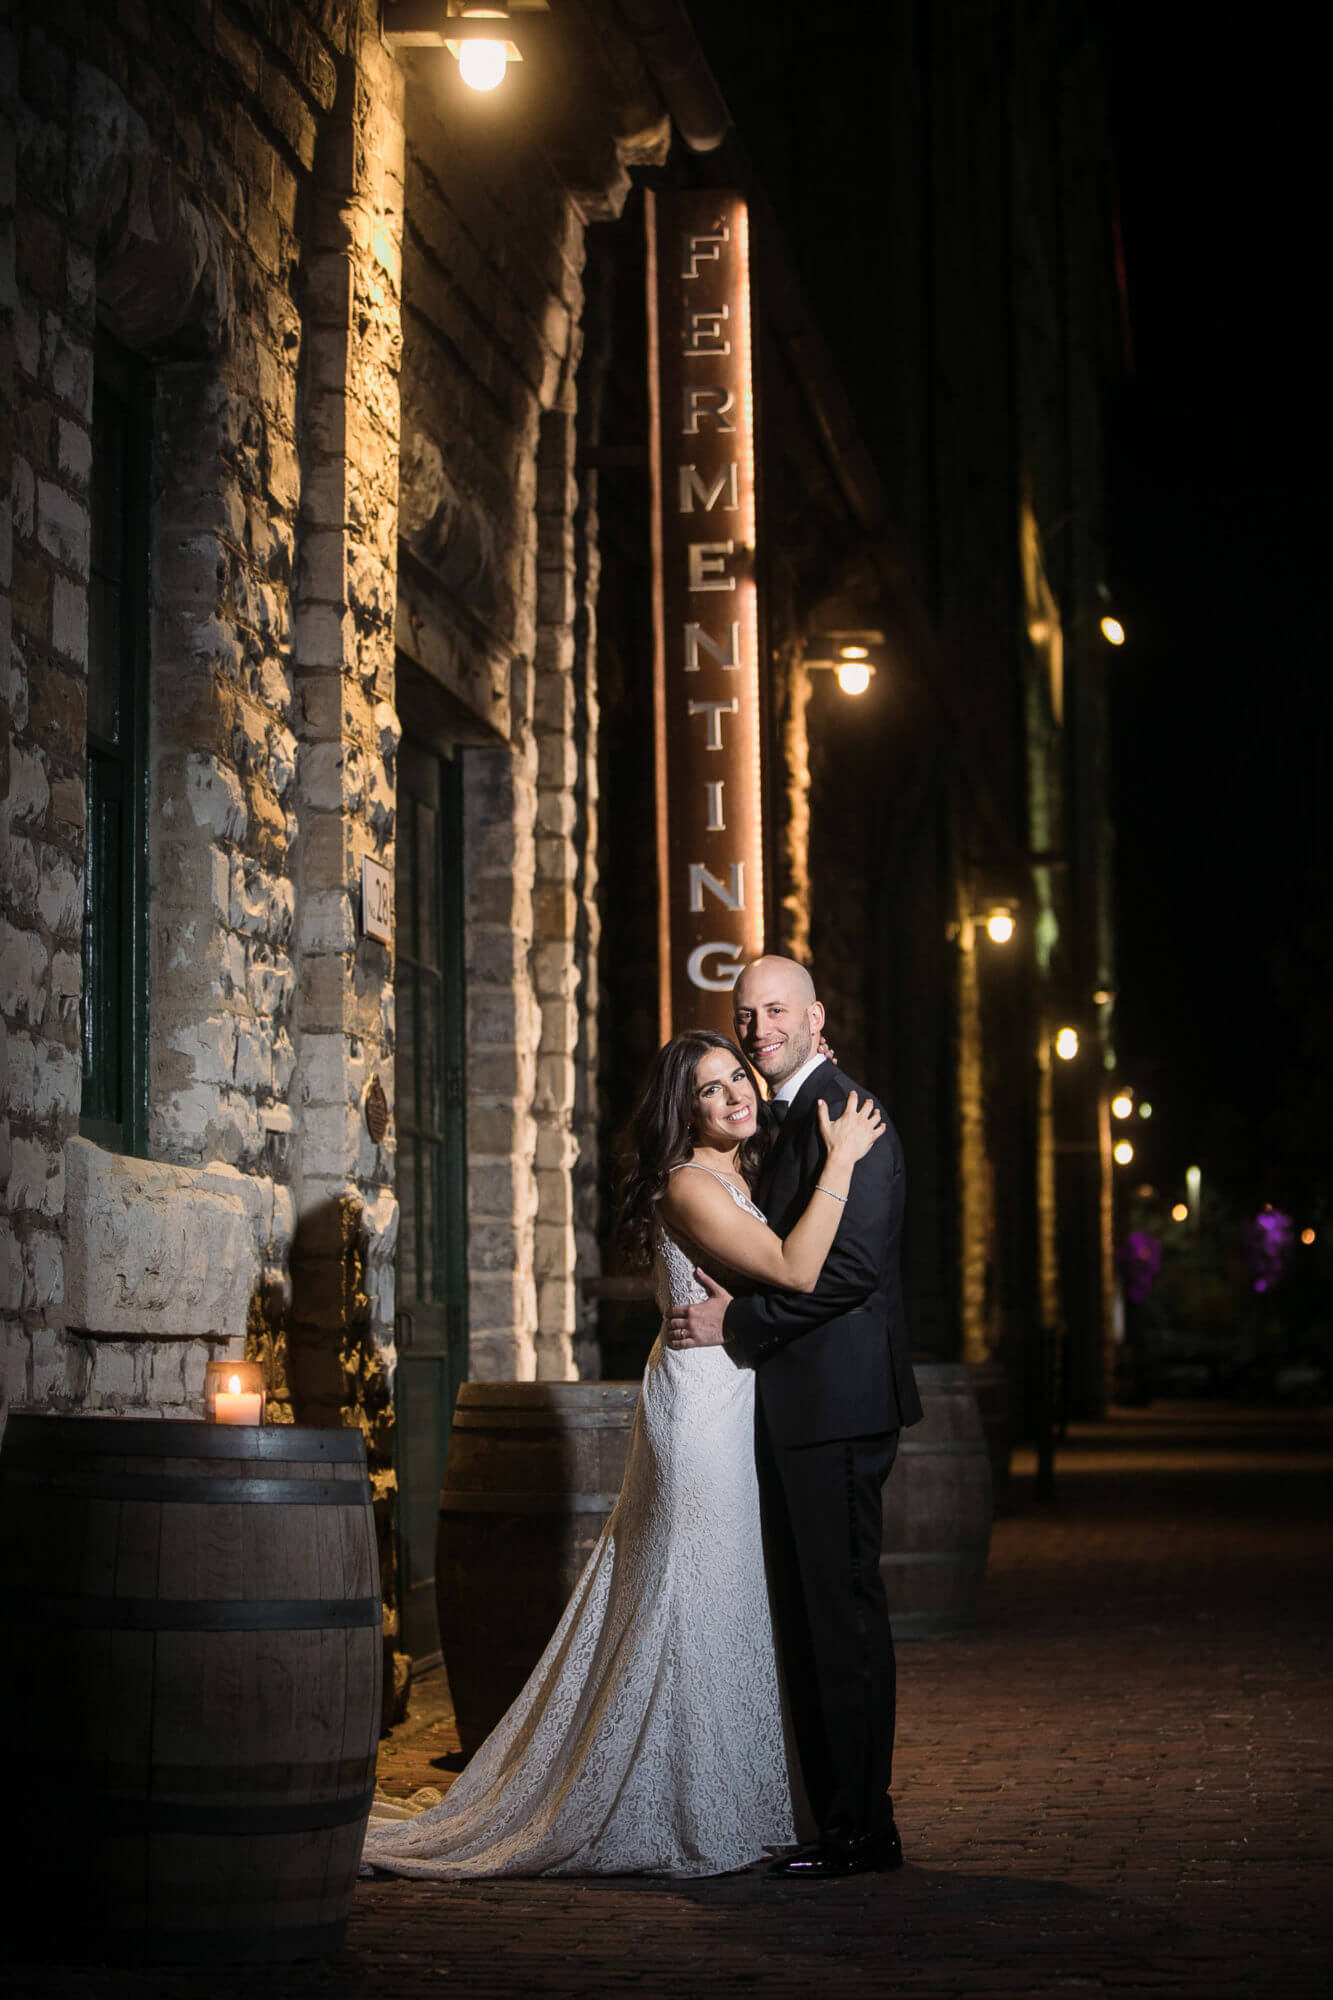 Rustic portrait of the bride and groom outside their wedding venue at Details of the wedding reception tables, lit candles and flower centrepieces, decorated at The Fermenting Cellar in Toronto